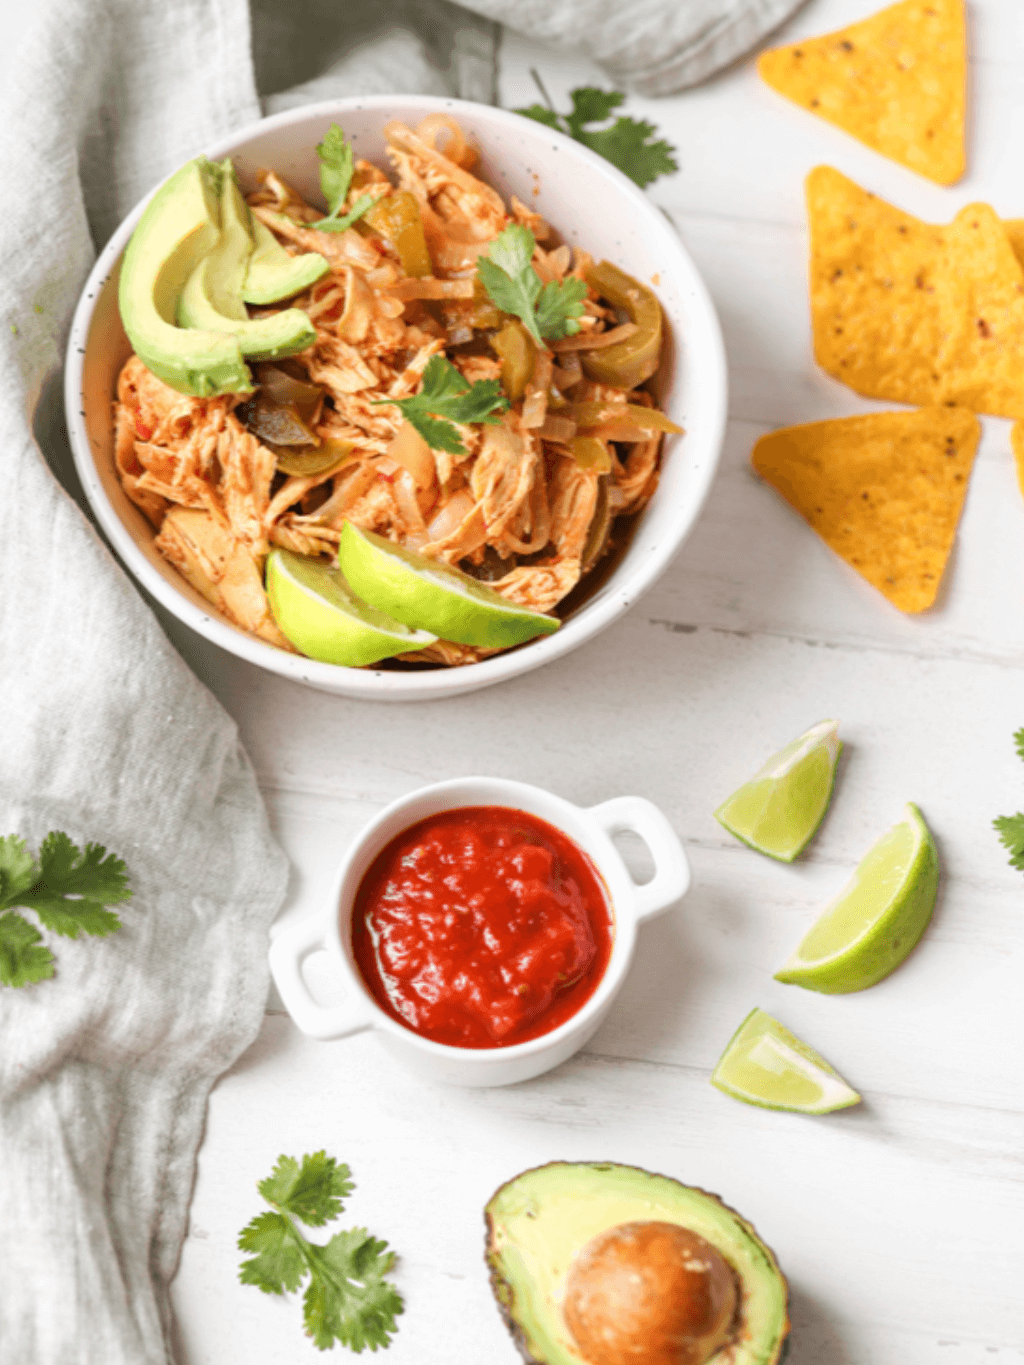 Bowl of shredded chicken with salsa dip and corn chips